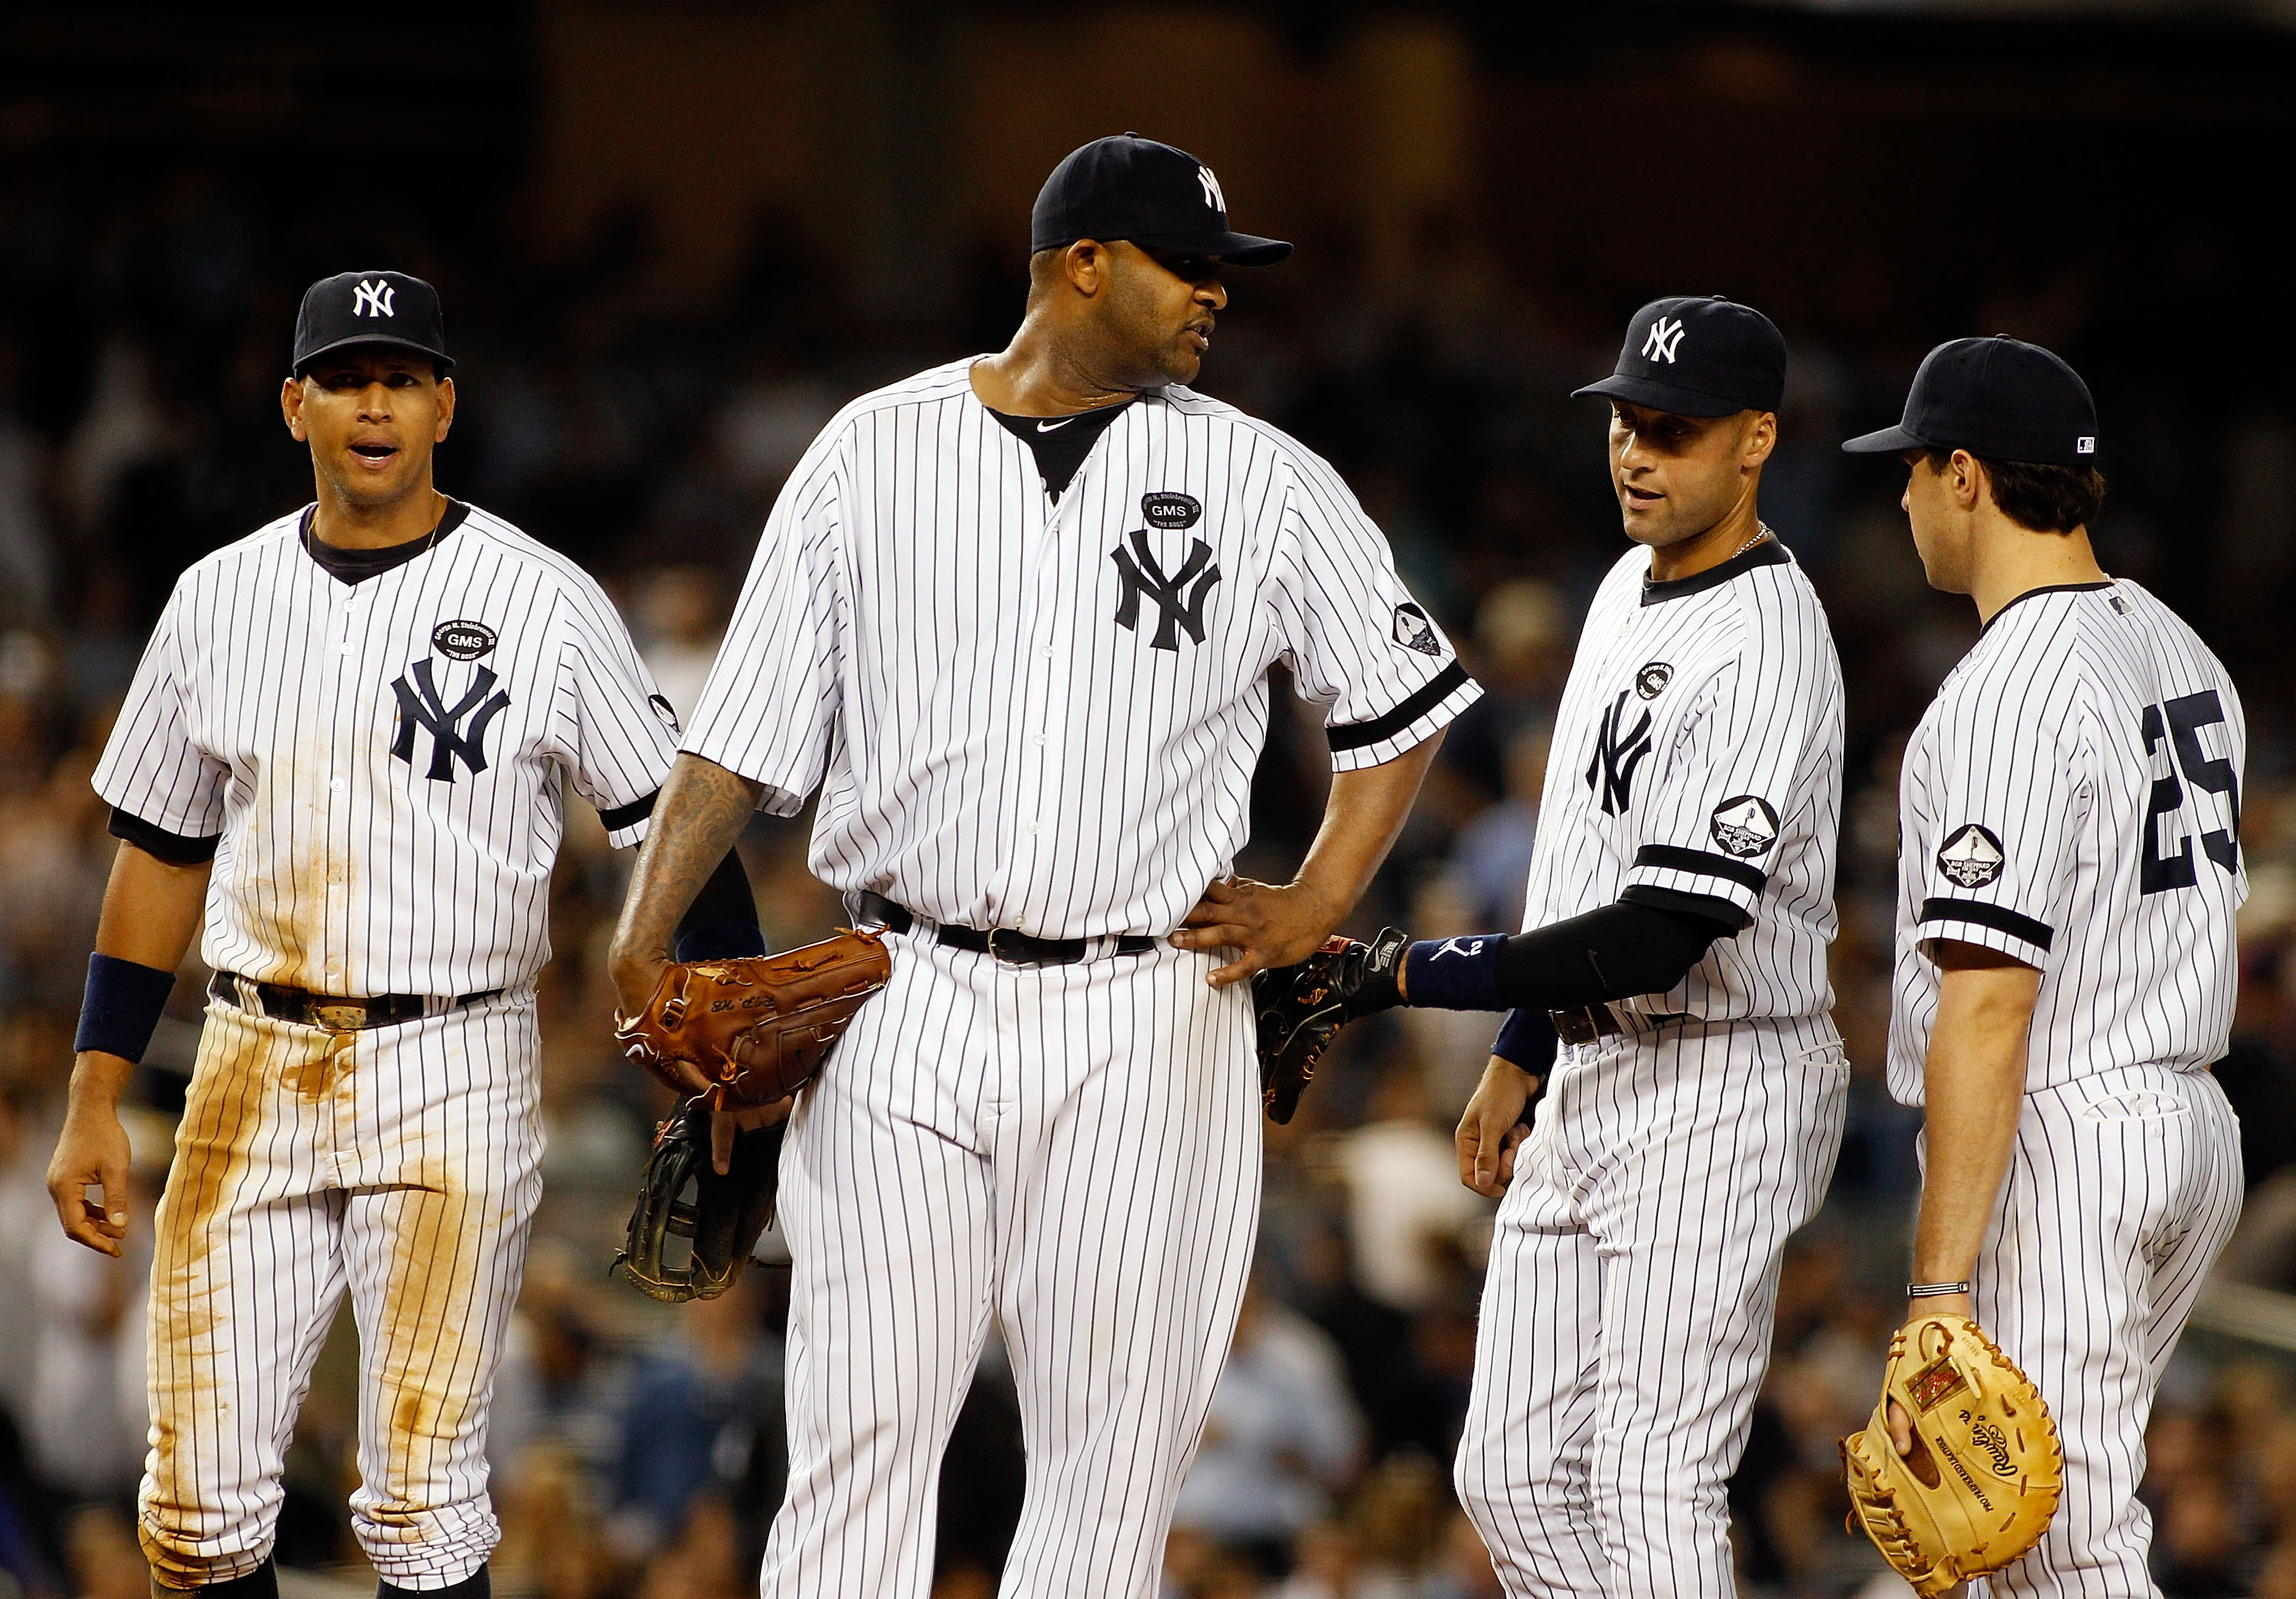 NEW YORK - SEPTEMBER 23:  CC Sabathia #52, Derek Jeter #2, Mark Teixeira #25 and Alex Rodriquez #13 of the New York Yankees looks on against the Tampa Bay Rays on September 23, 2010 at Yankee Stadium in the Bronx borough of New York City.  (Photo by Mike